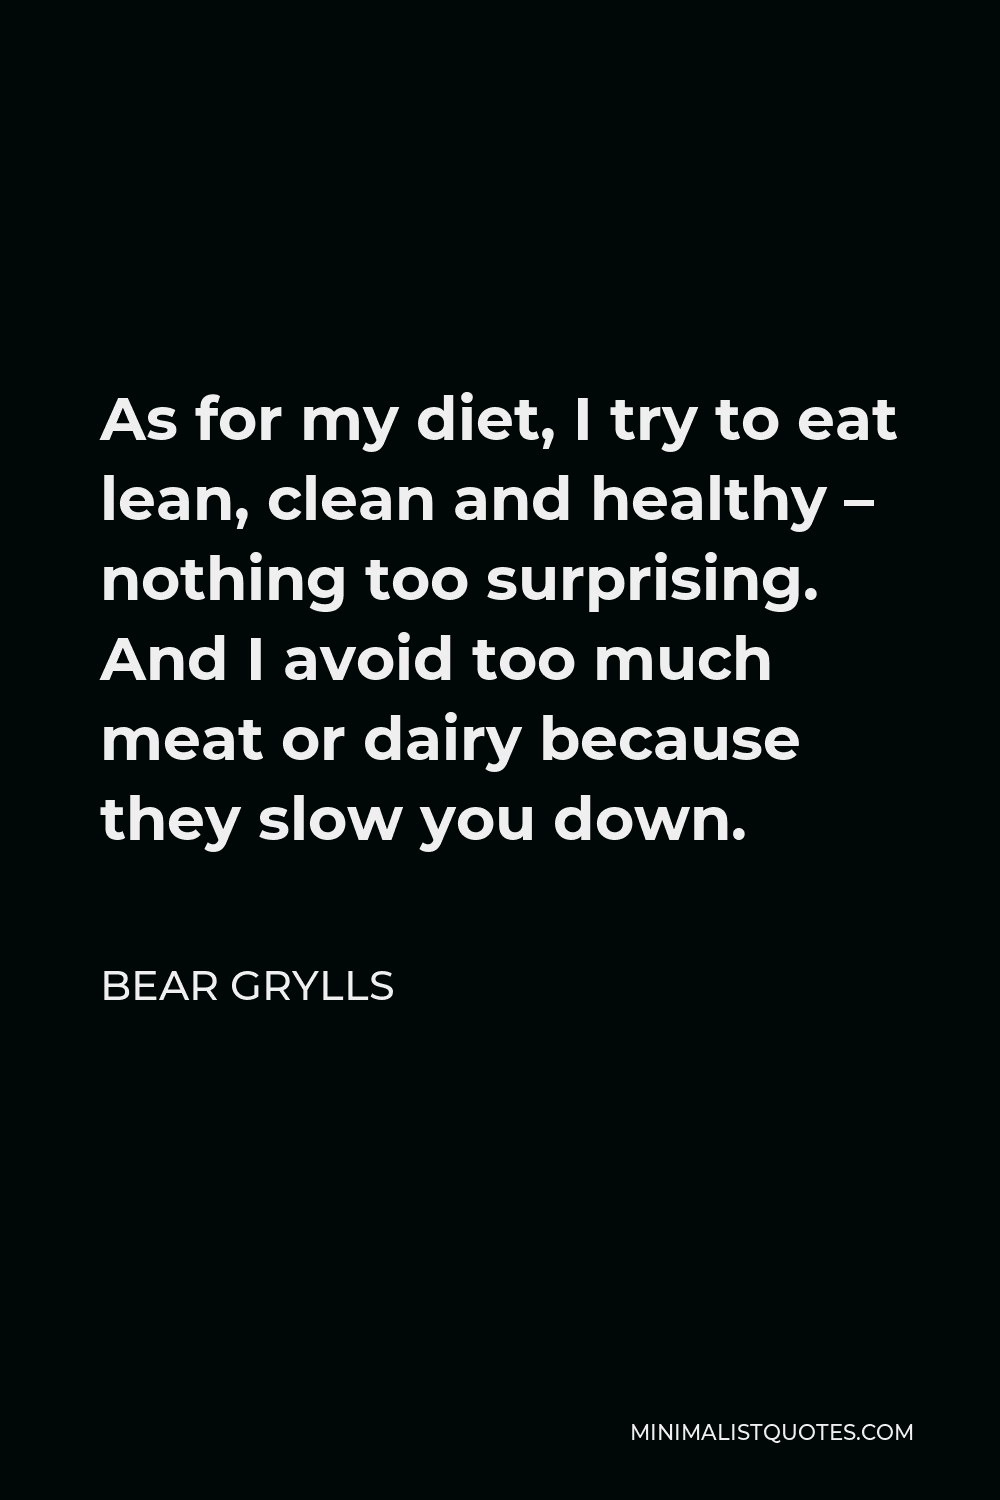 Bear Grylls Quote - As for my diet, I try to eat lean, clean and healthy – nothing too surprising. And I avoid too much meat or dairy because they slow you down.